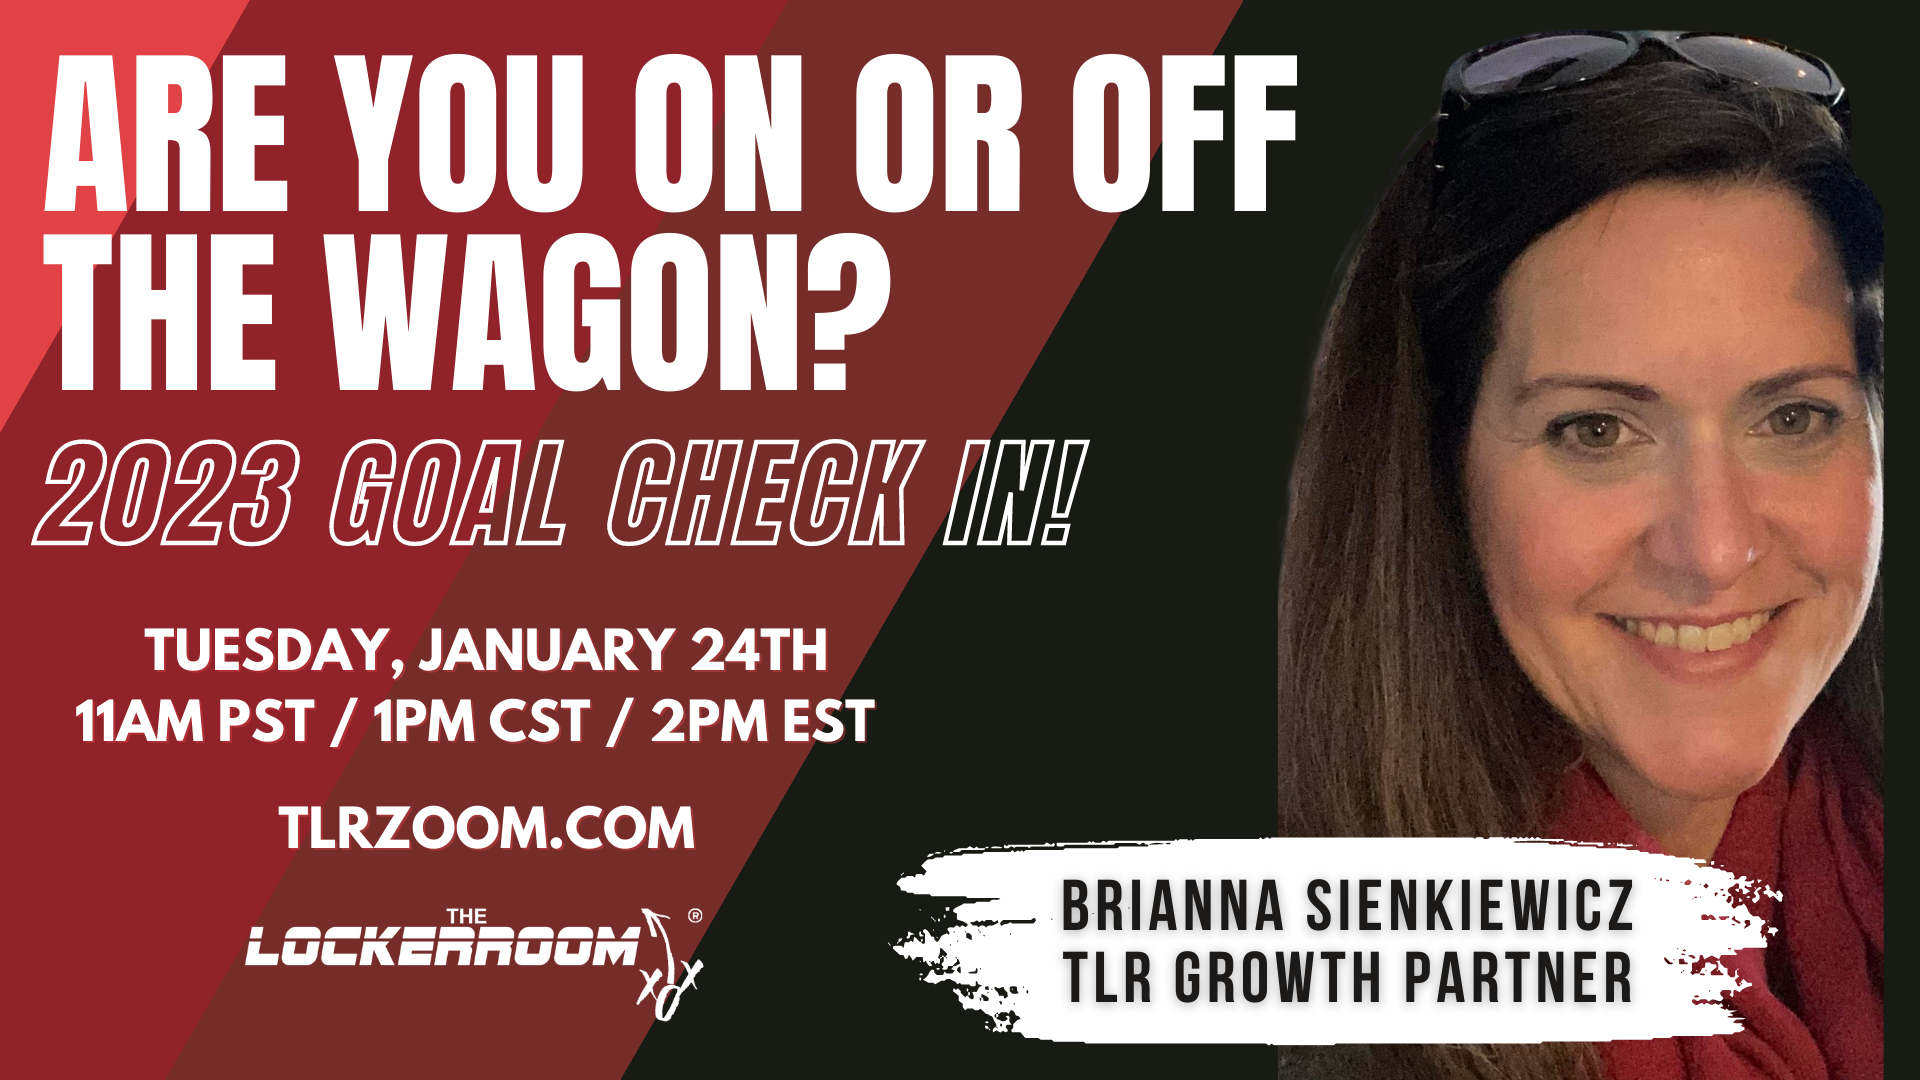 
TLR: Are you on or off the wagon? 2023 goal check in!